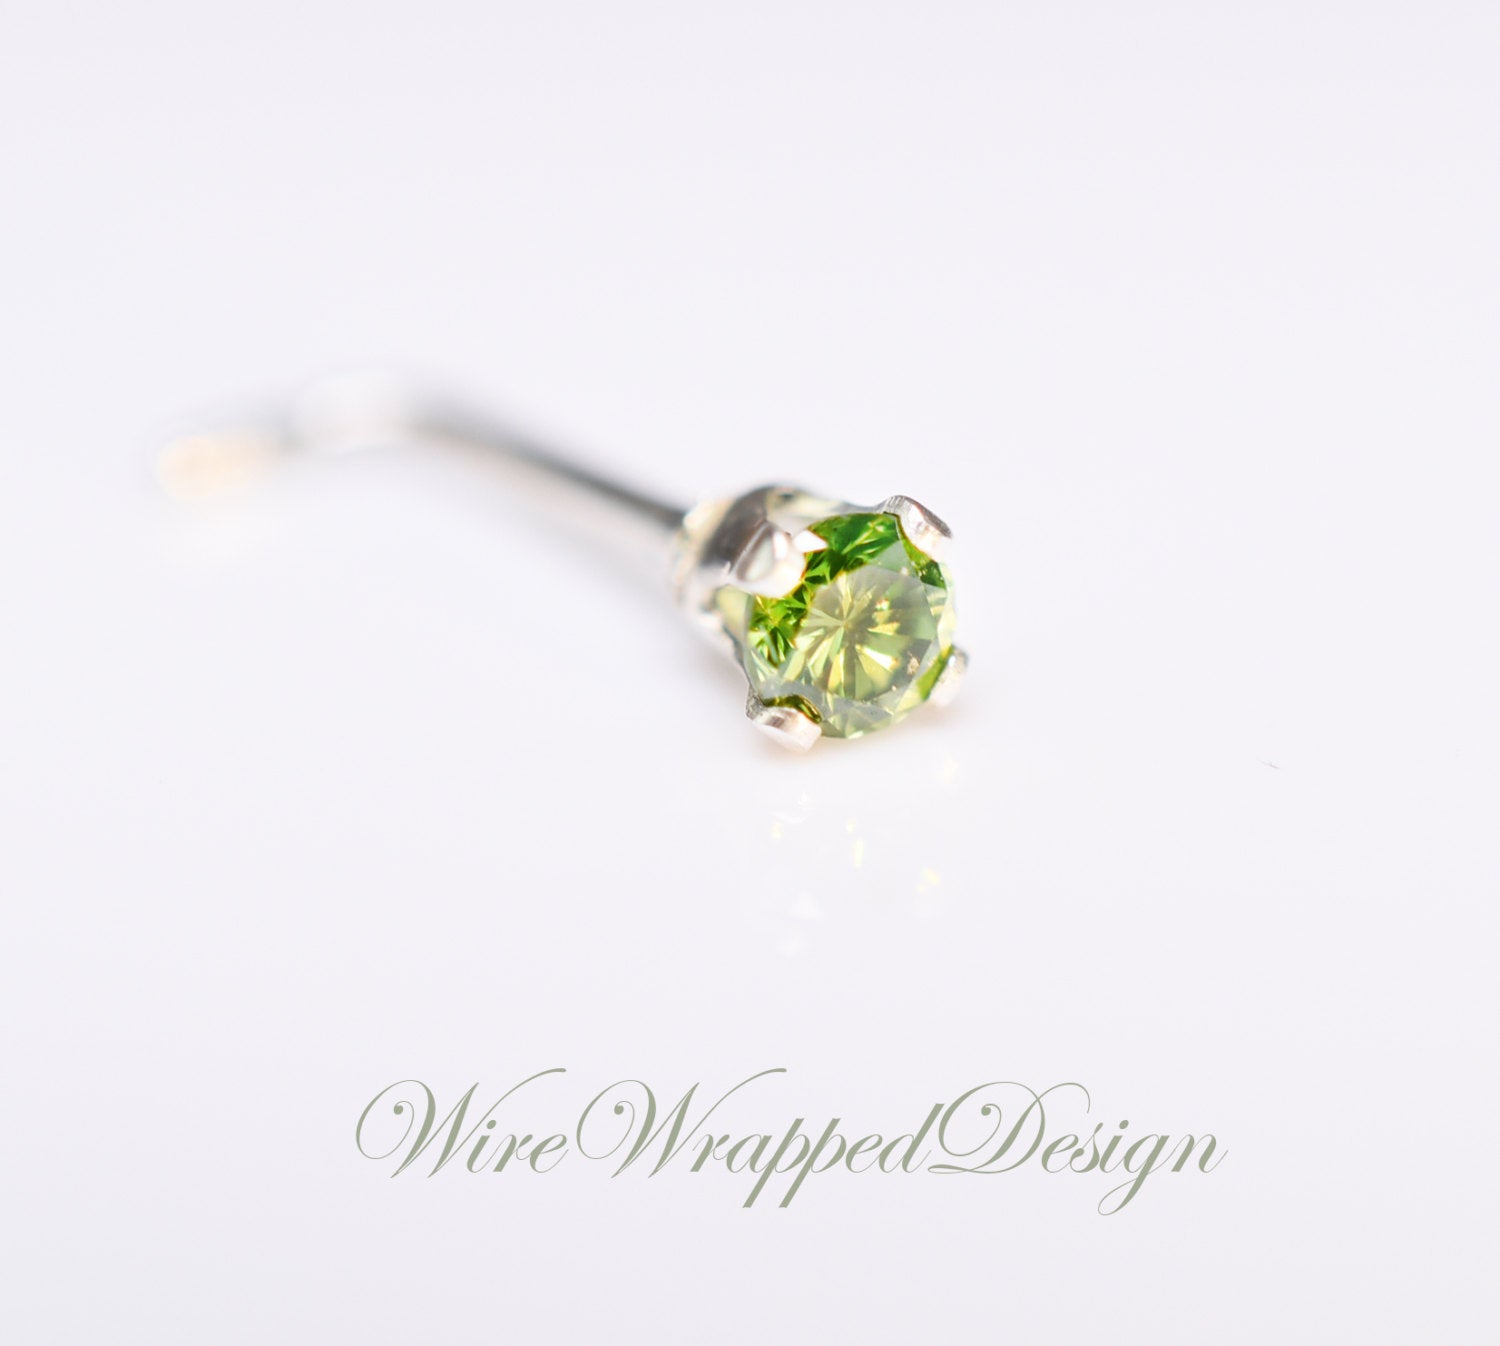 DIAMOND - Genuine GREEN DIAMOND Nose Stud 2mm - Post w/ 14k Solid Yellow or White Gold or Sterling Silver - Helix Tragus Lobe Lip Cartilage